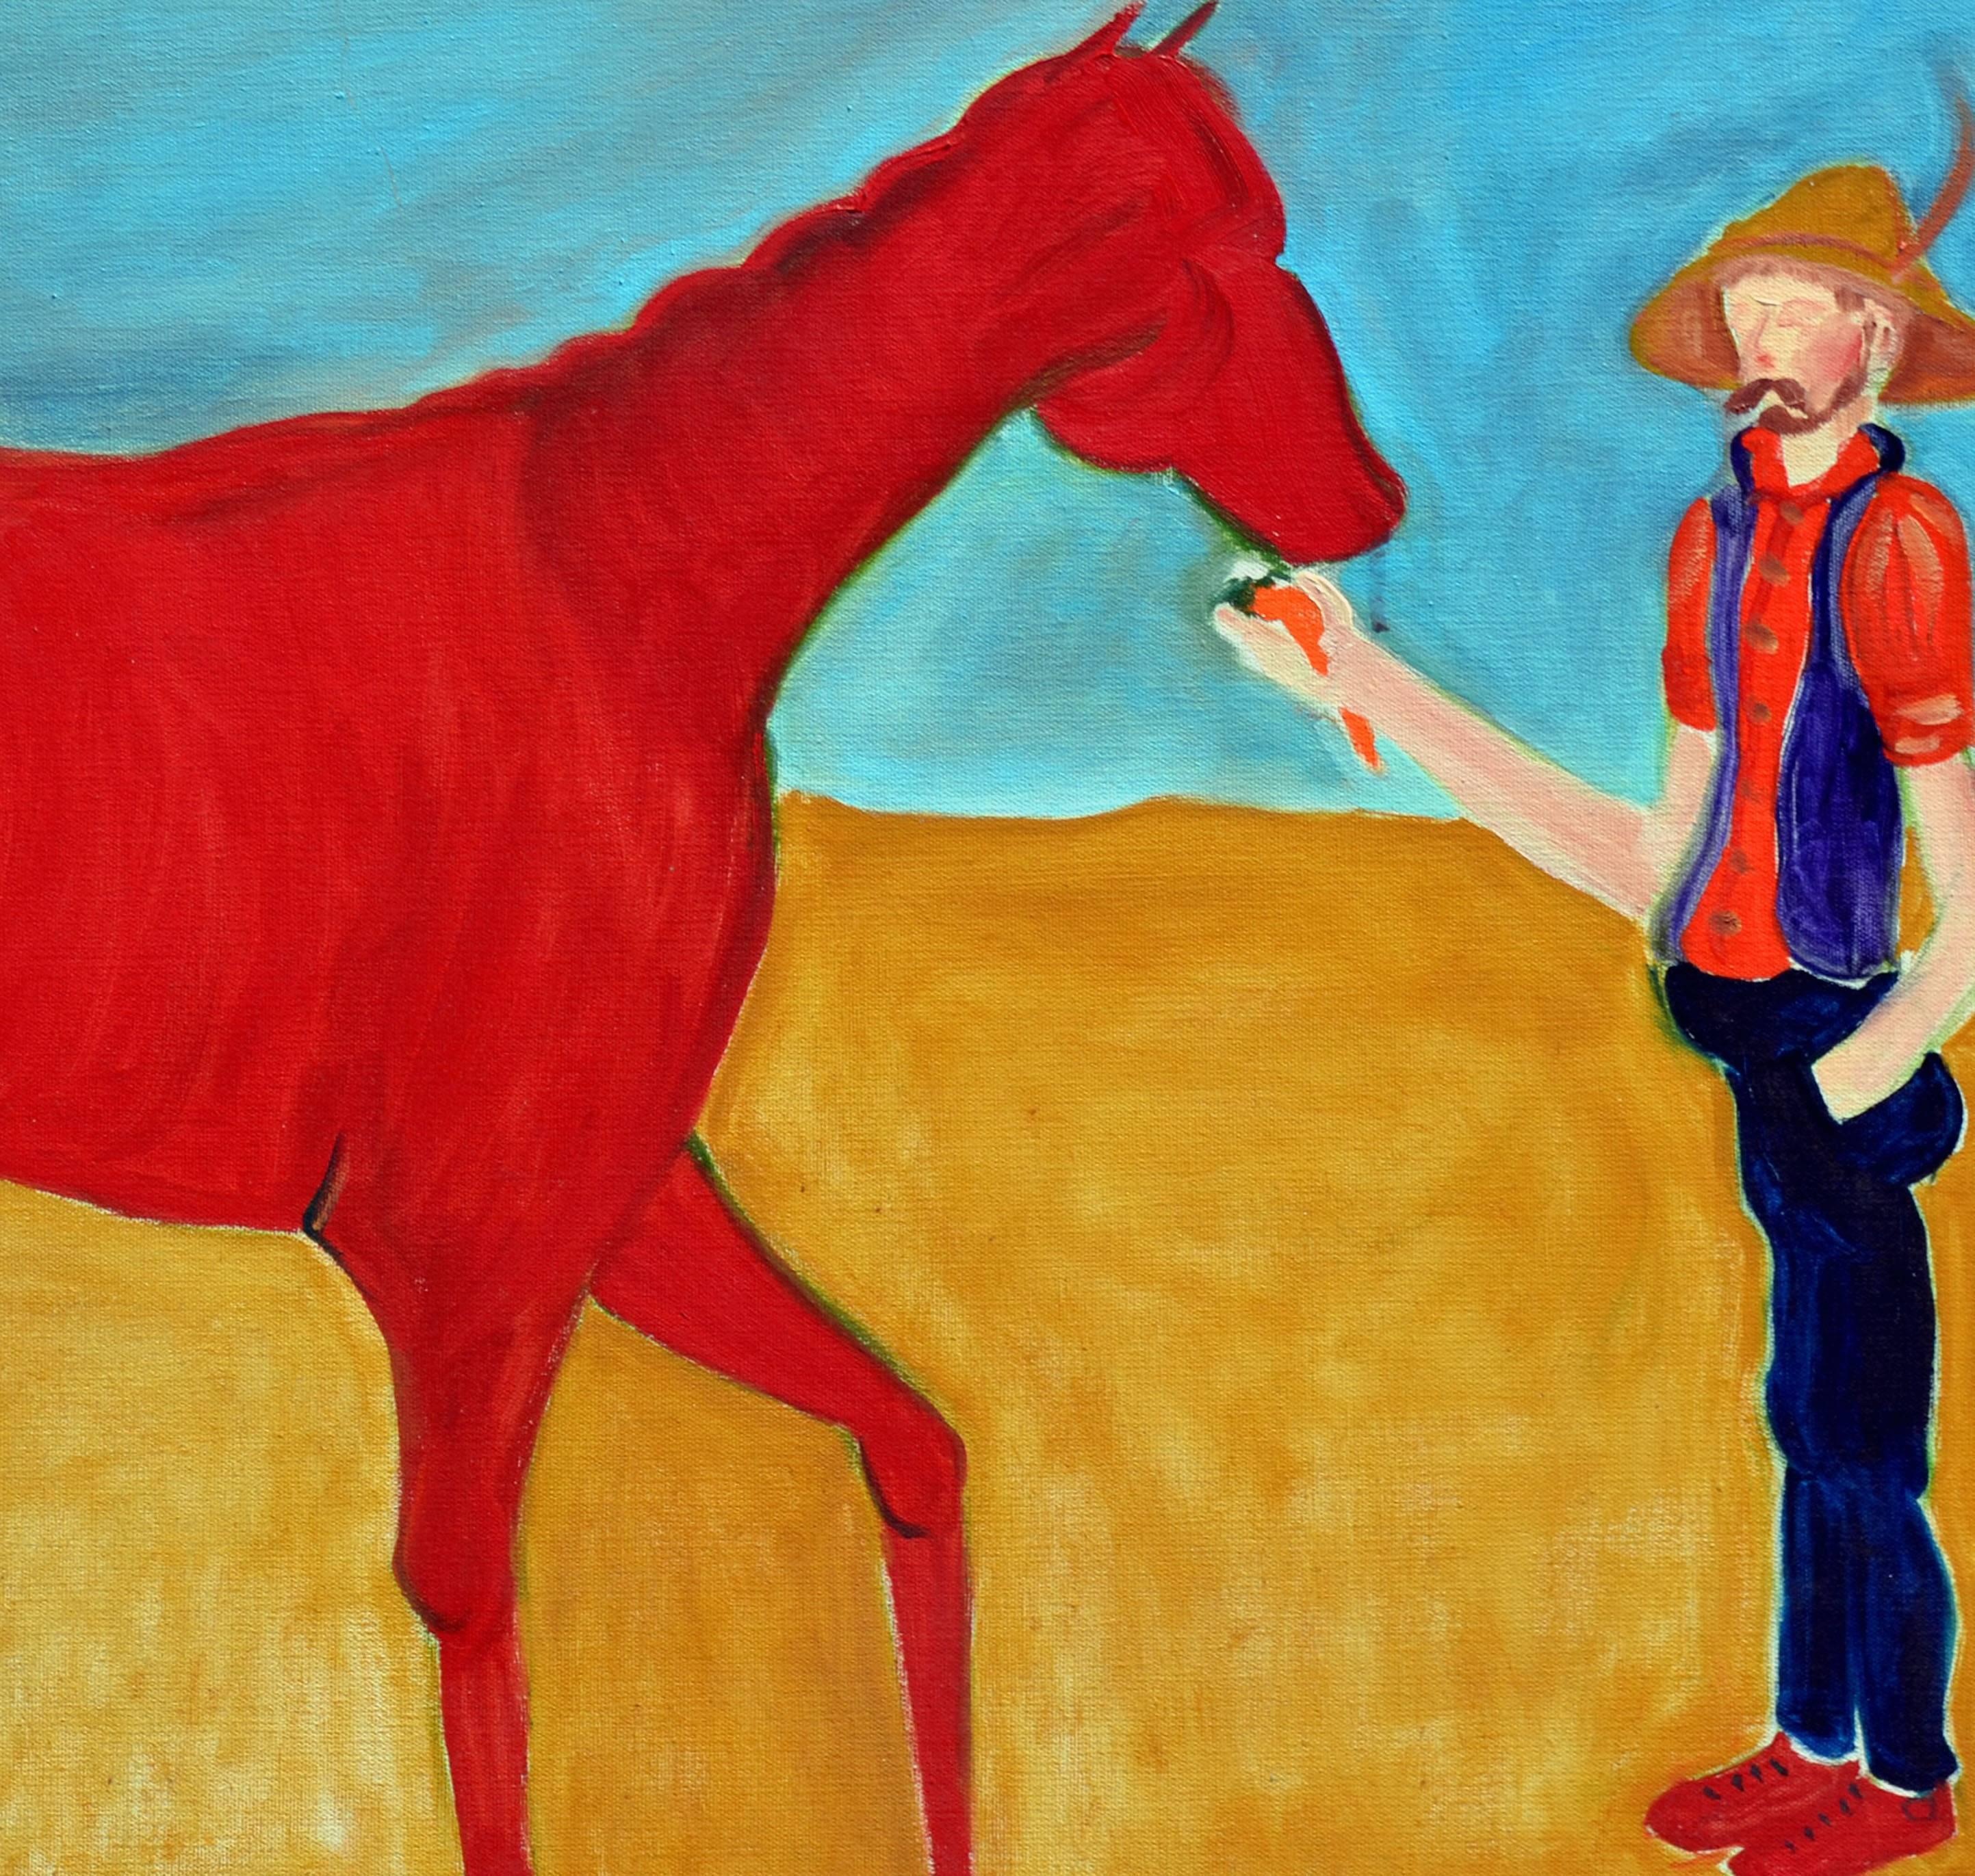 Red Horse & Cowboy by Molly Brubaker - Expressionist Painting by Molly E. Brubaker